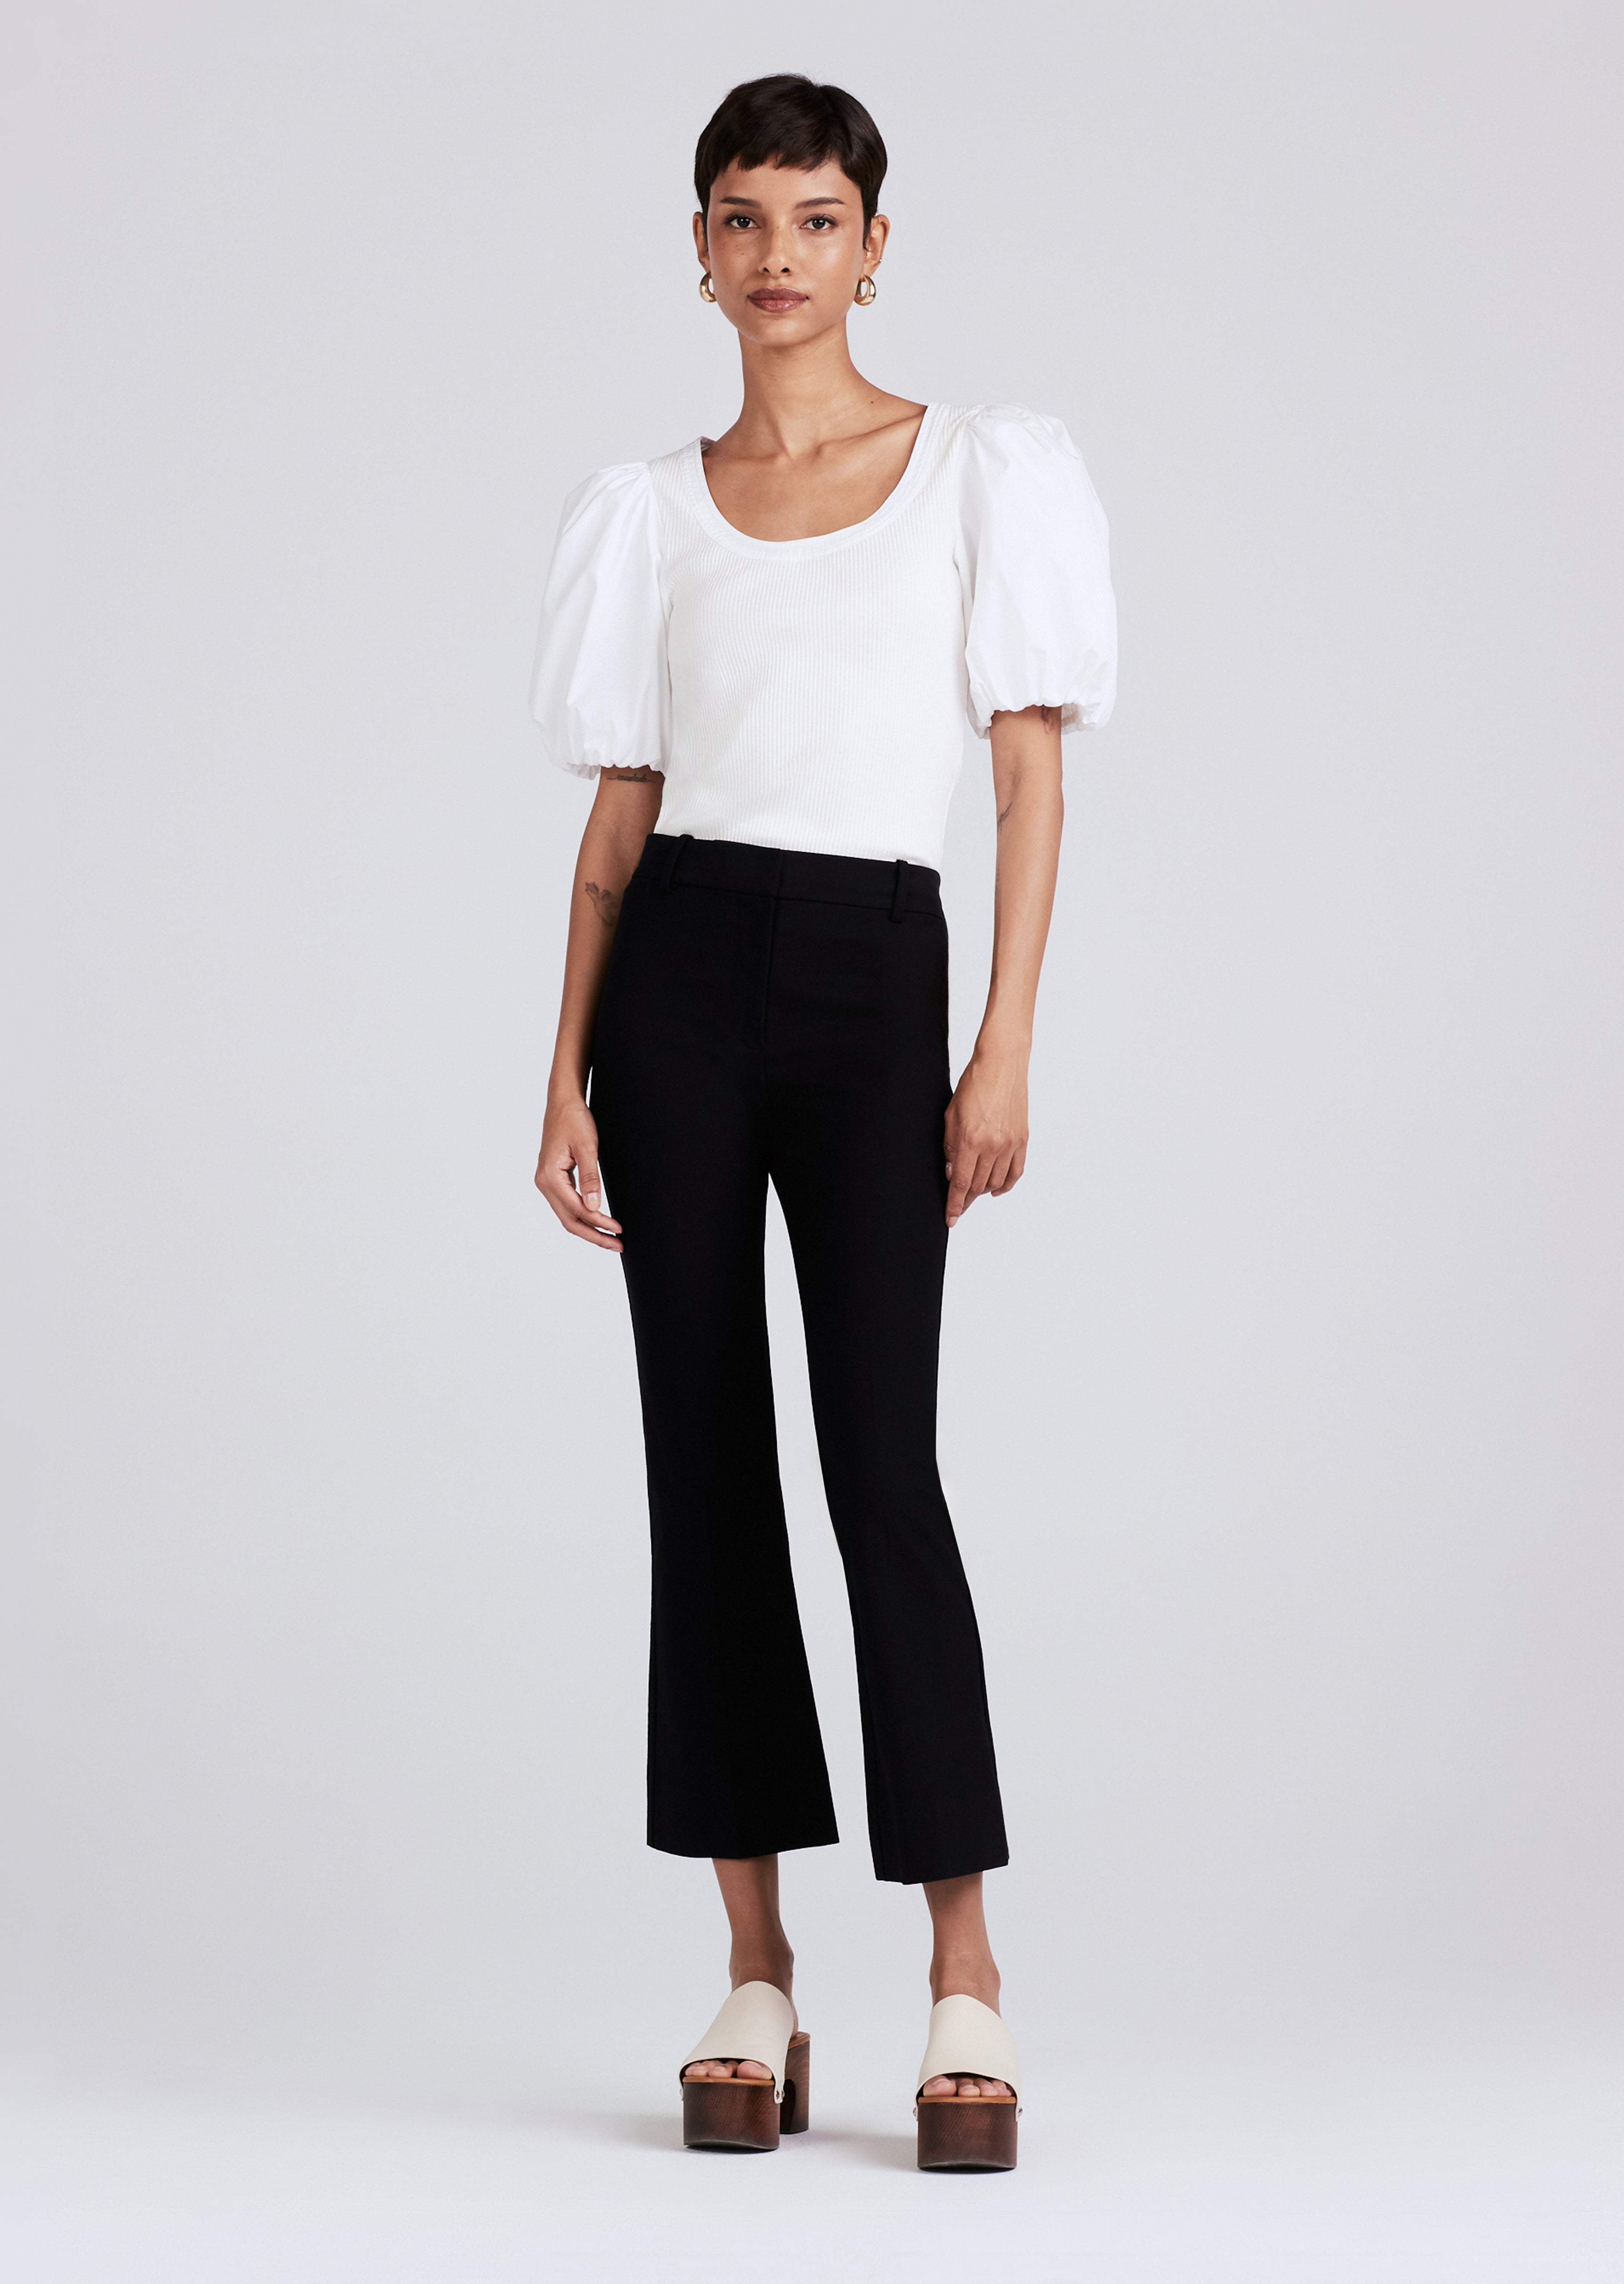 Derek Lam 10 Crosby Trouser Review: Why This 'Vogue' Editor Loves